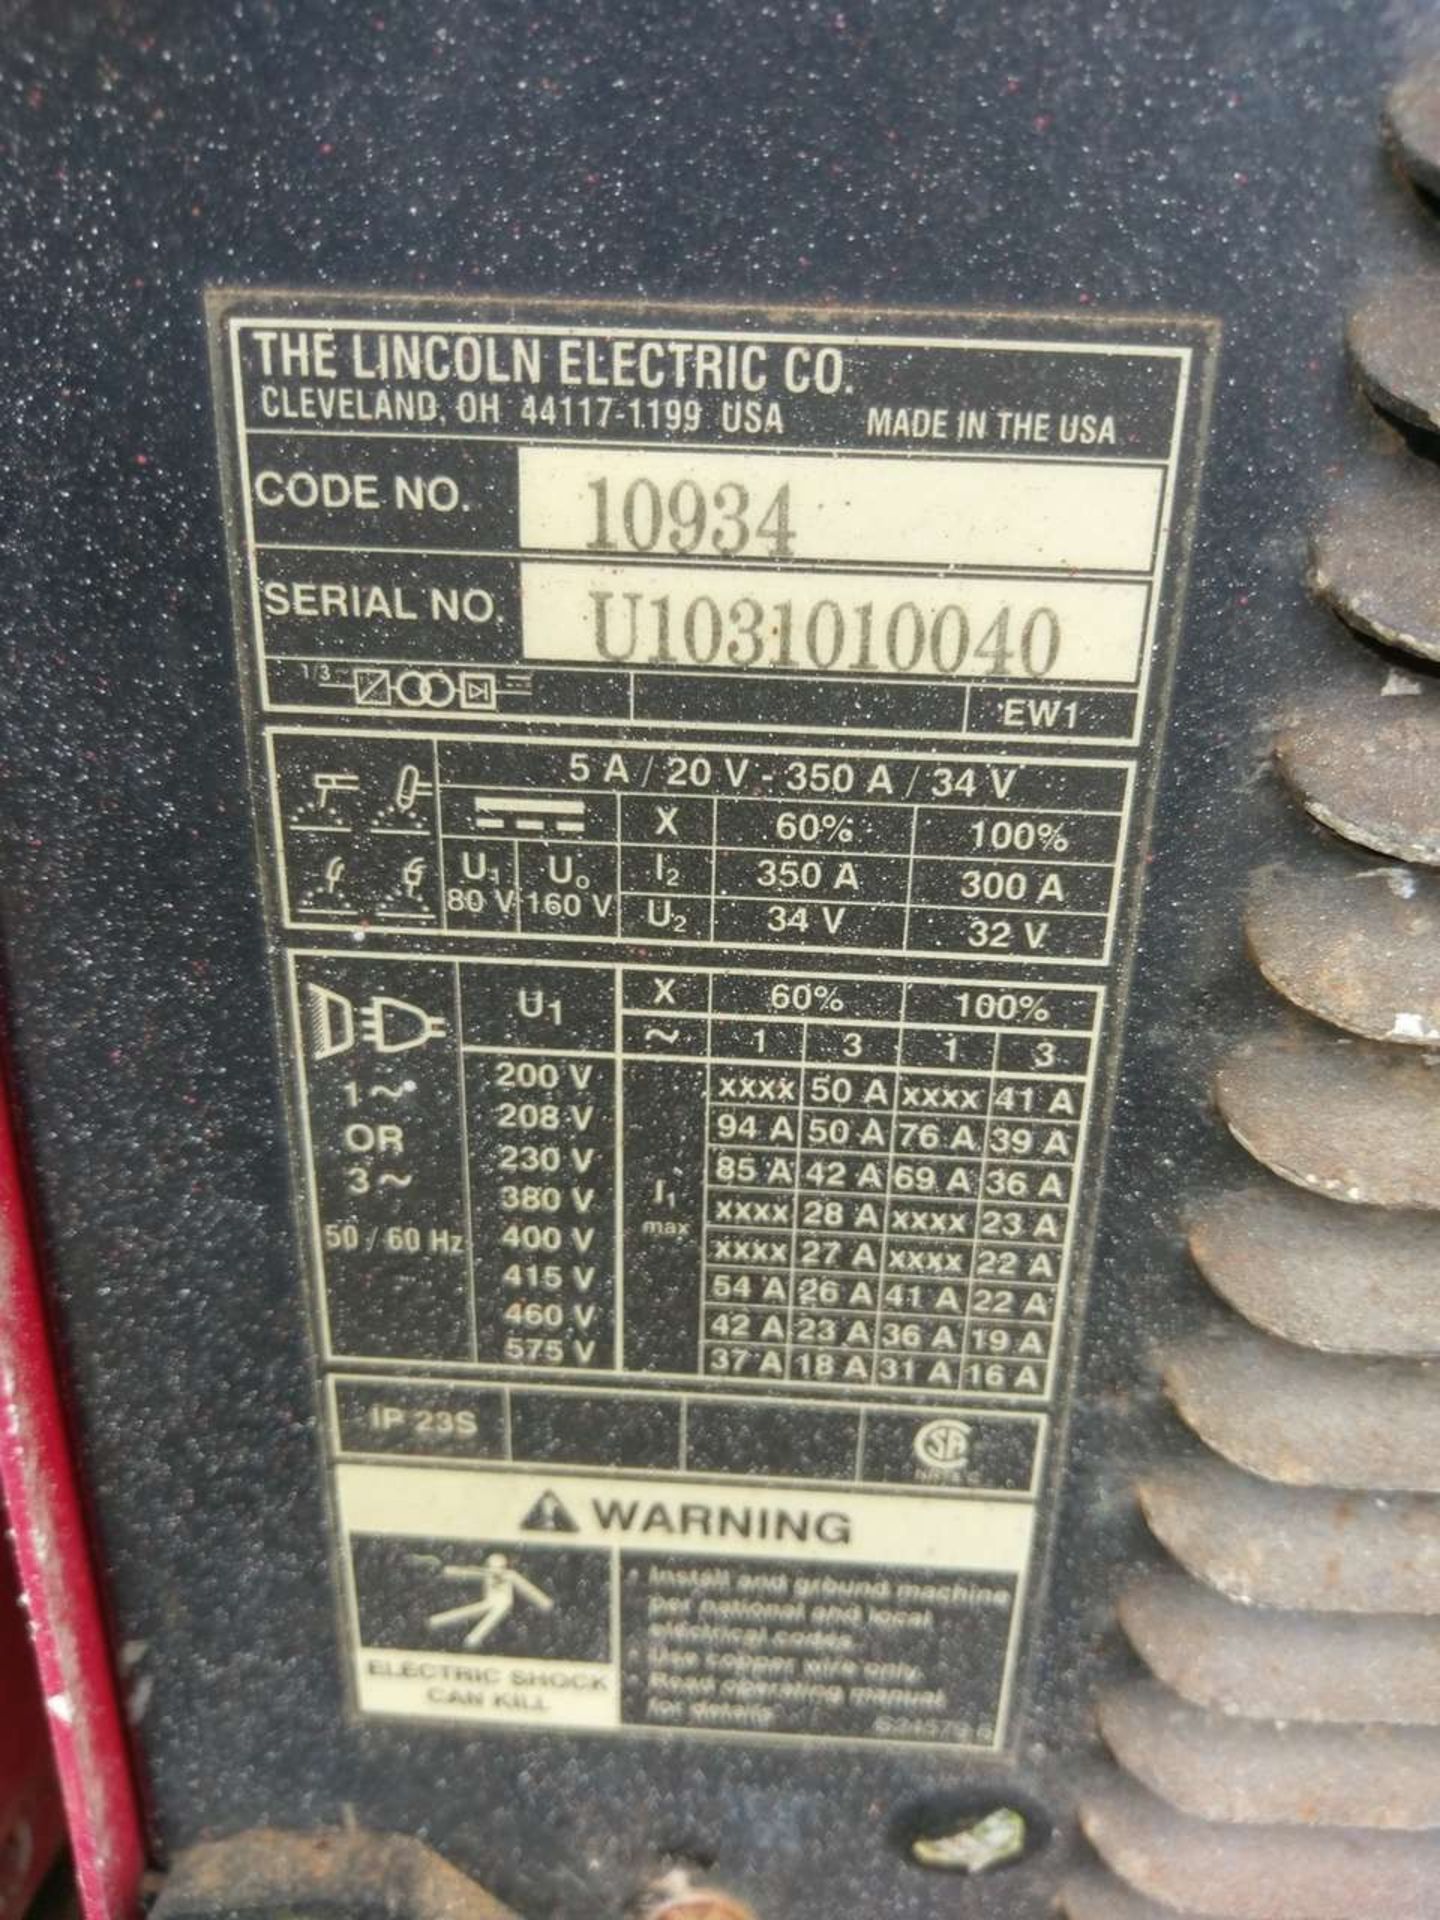 Lincoln Electric Invertec V-350 Pro (4) Welding Power Source - Image 6 of 18